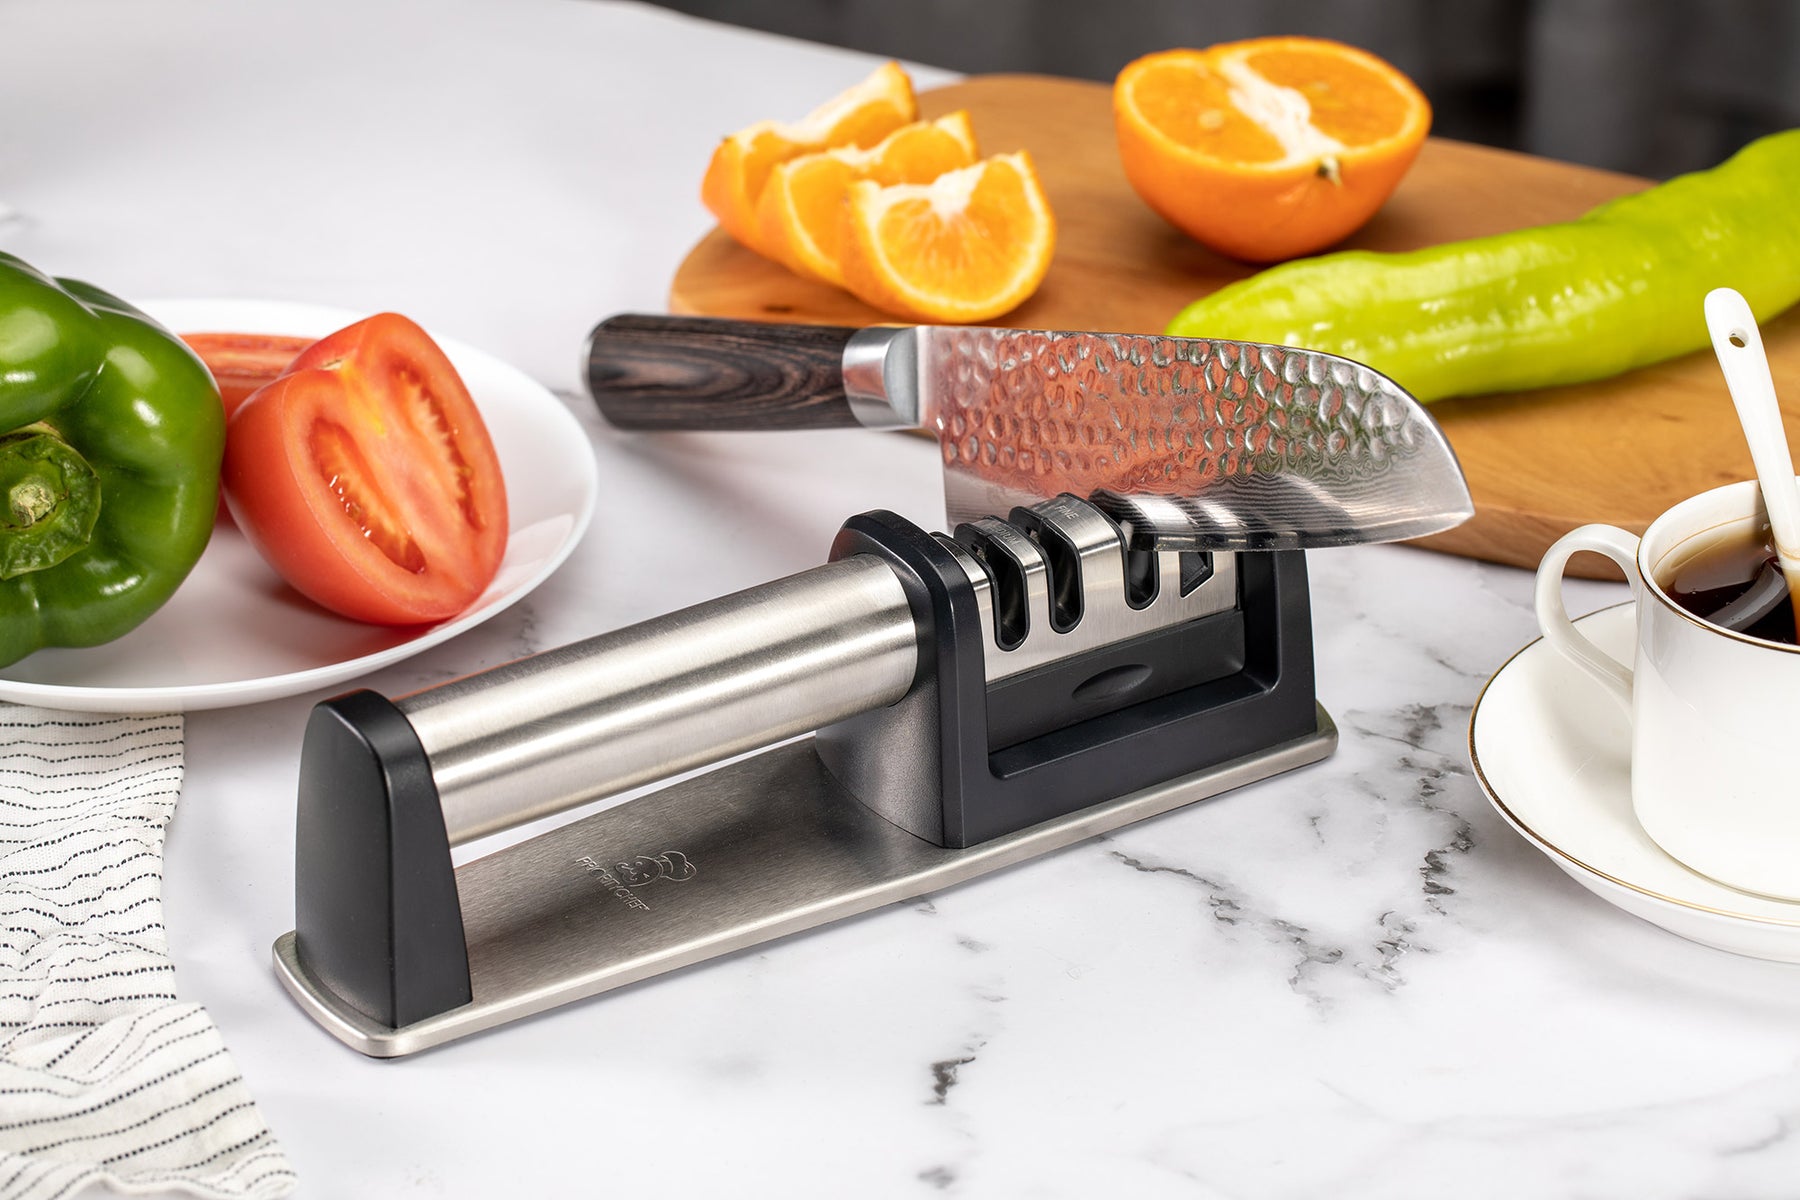 PriorityChef Knife Sharpener for Straight and Serrated Knives, 2-Stage  Diamond Coated Wheel System, Sharpens Dull Knives Quickly, Safe and Easy to  Use 